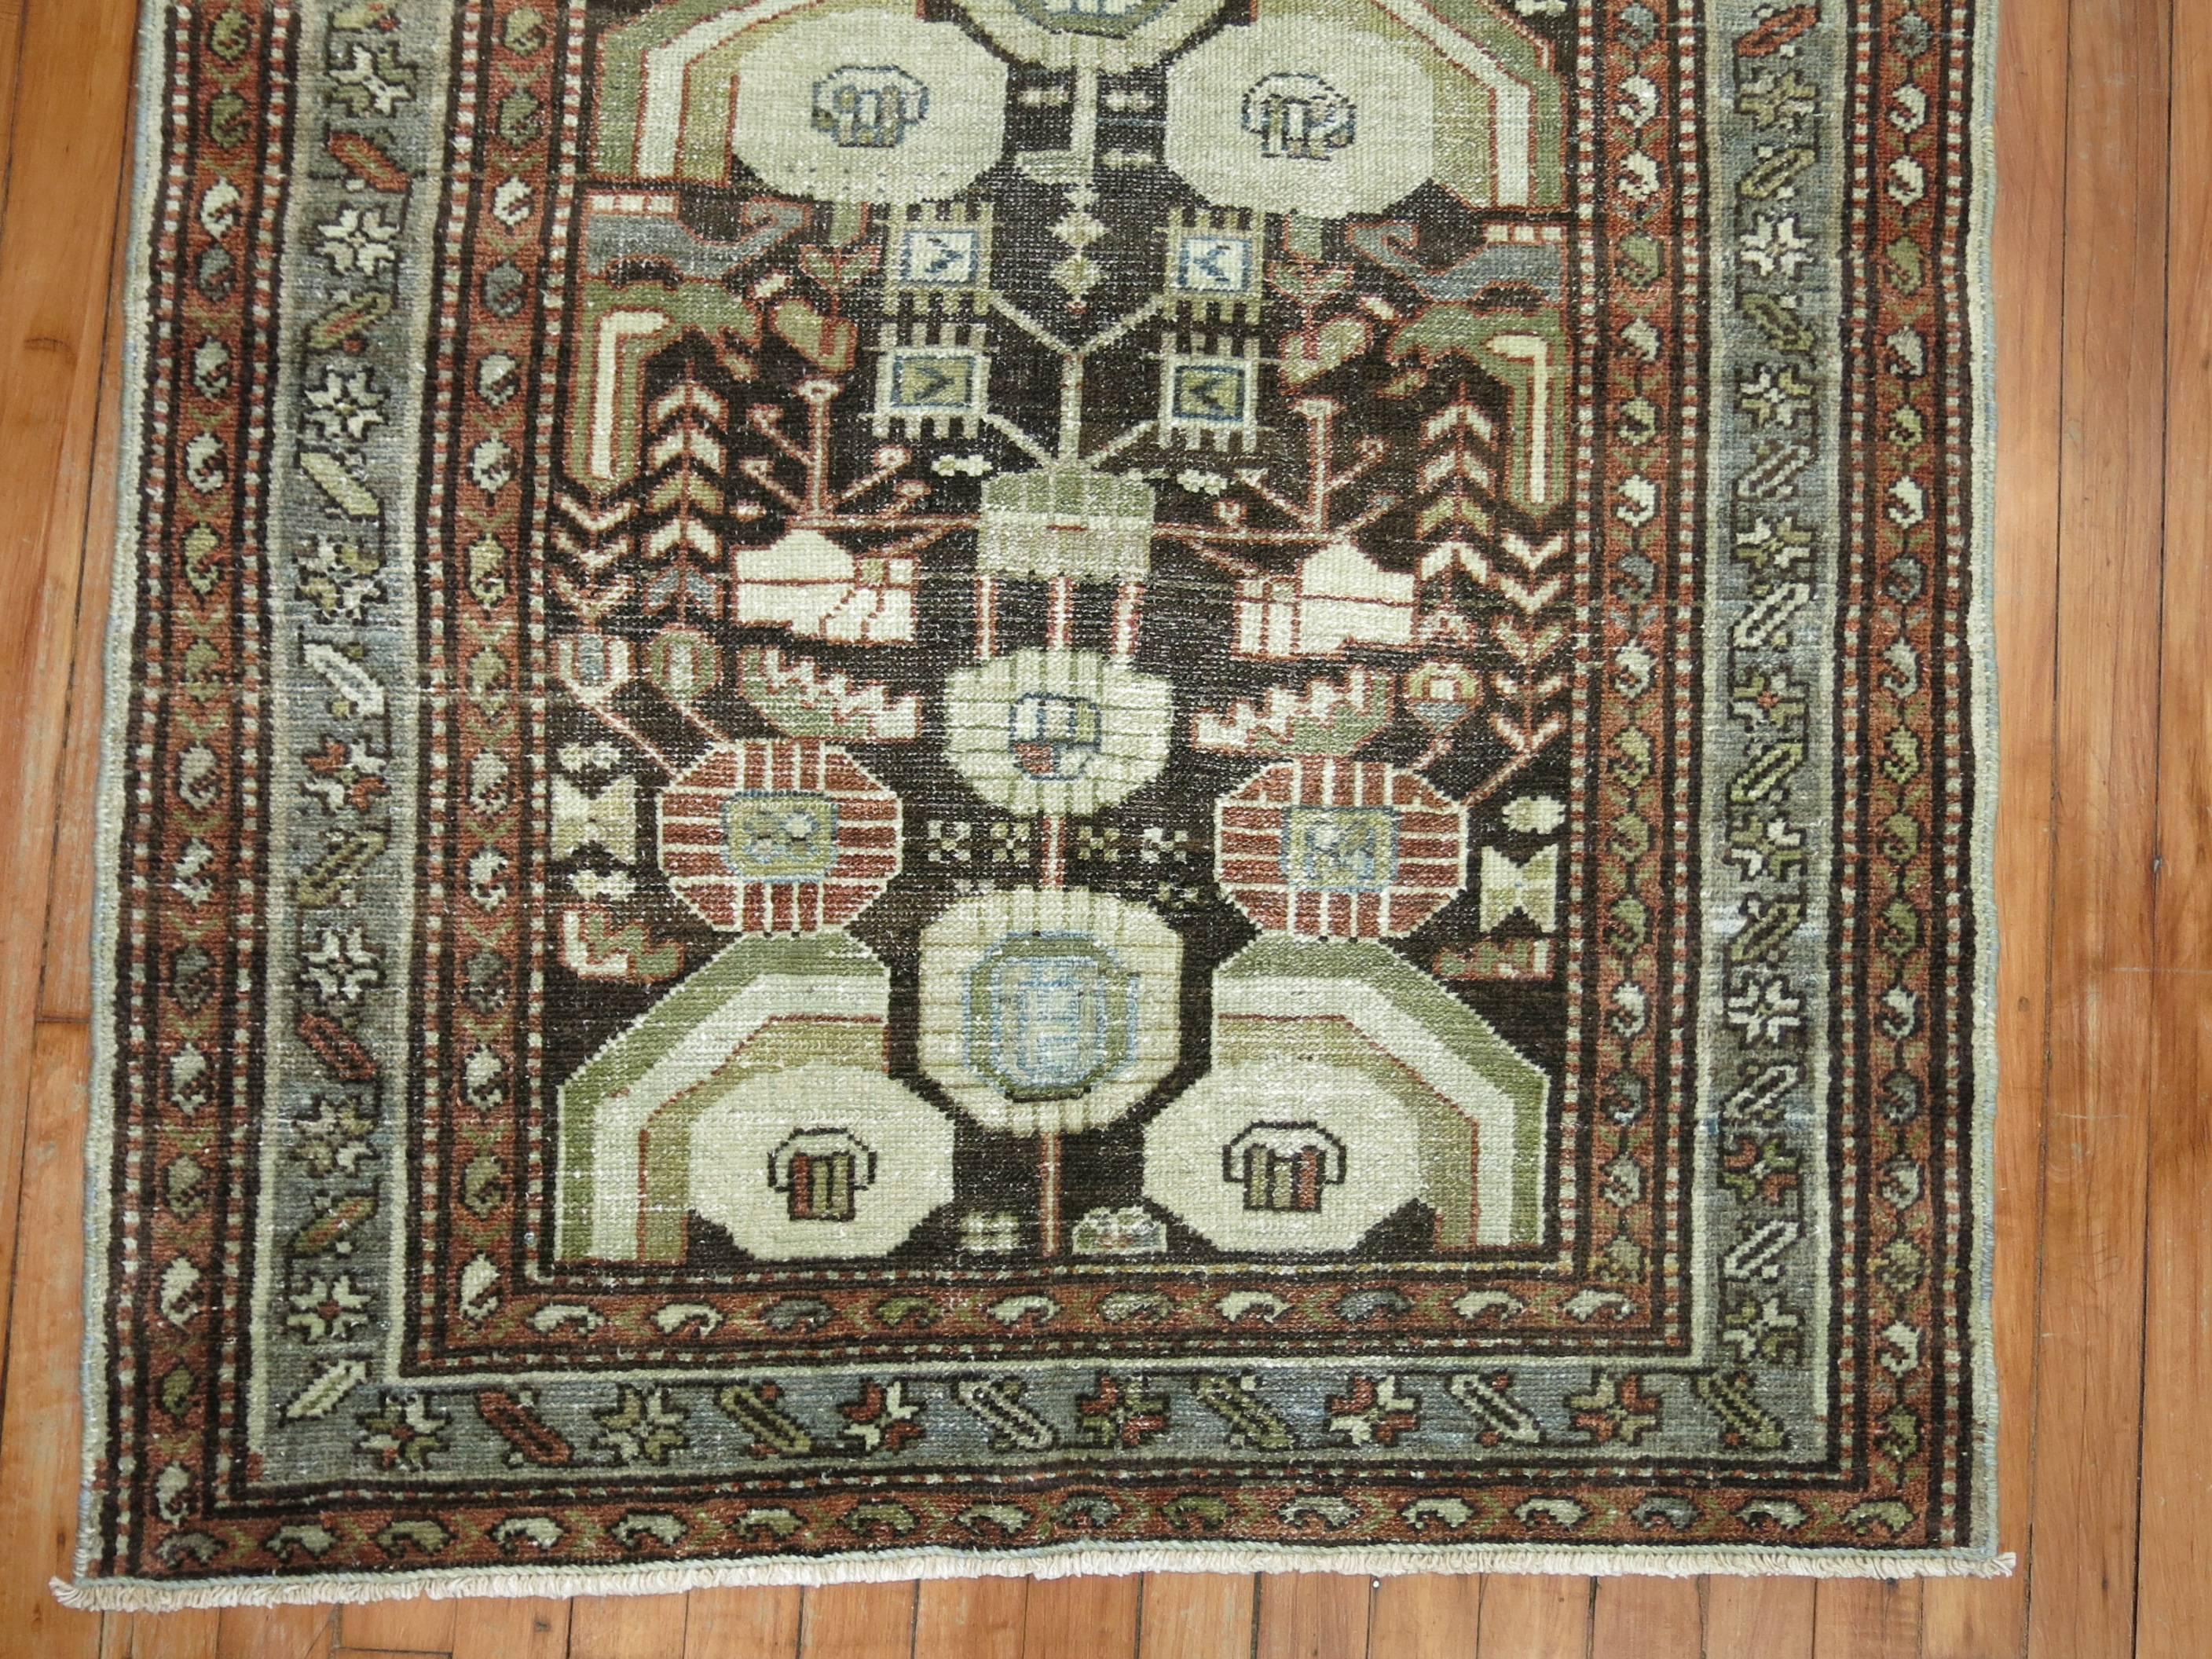 An early 20th century Persian Malayer rug in earth tones.

Size: 3'3